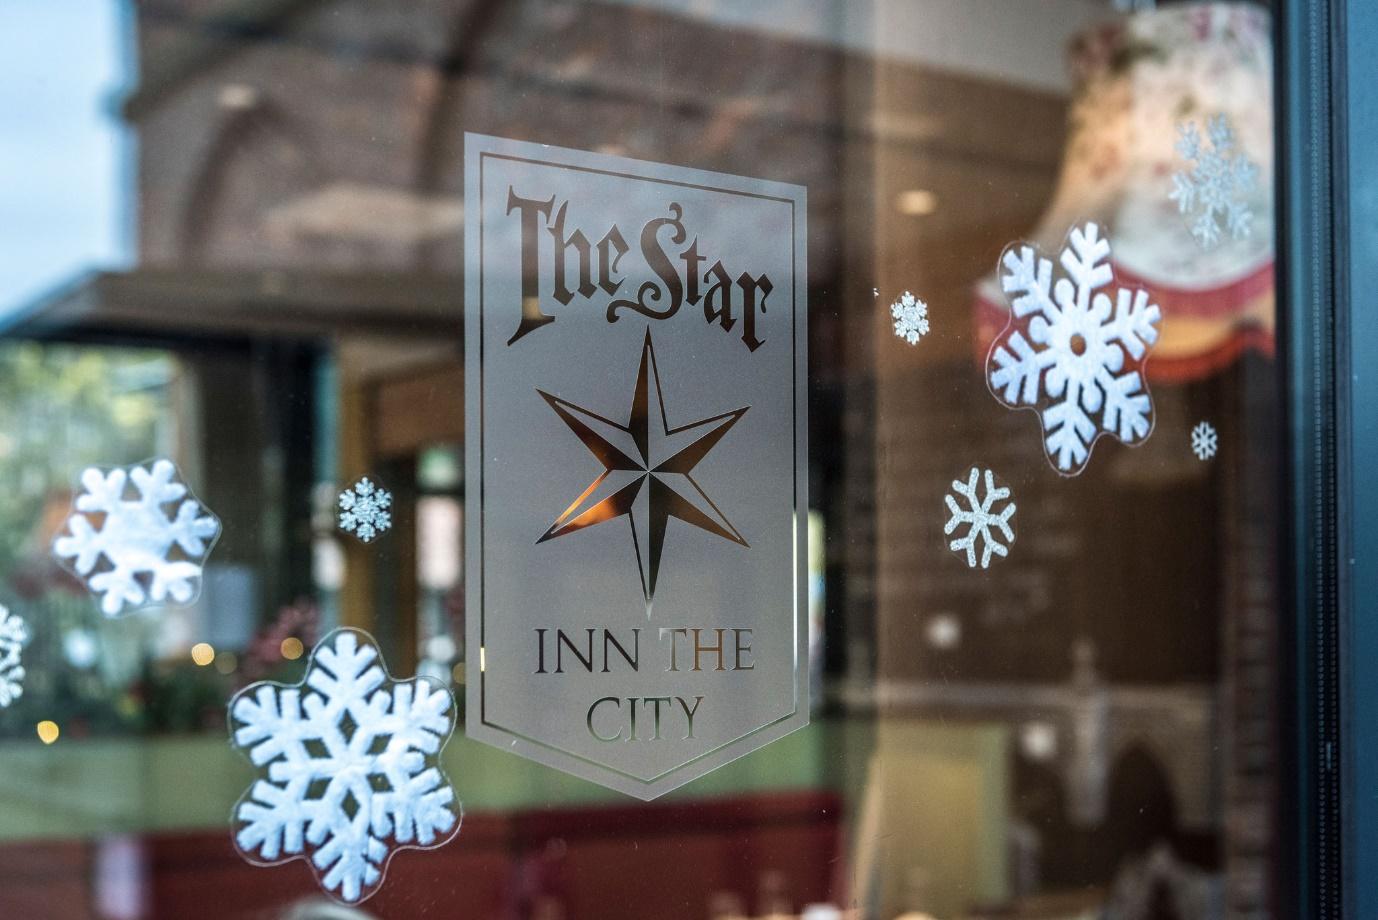 May be an image of text that says "TheStar INN THE CITY"